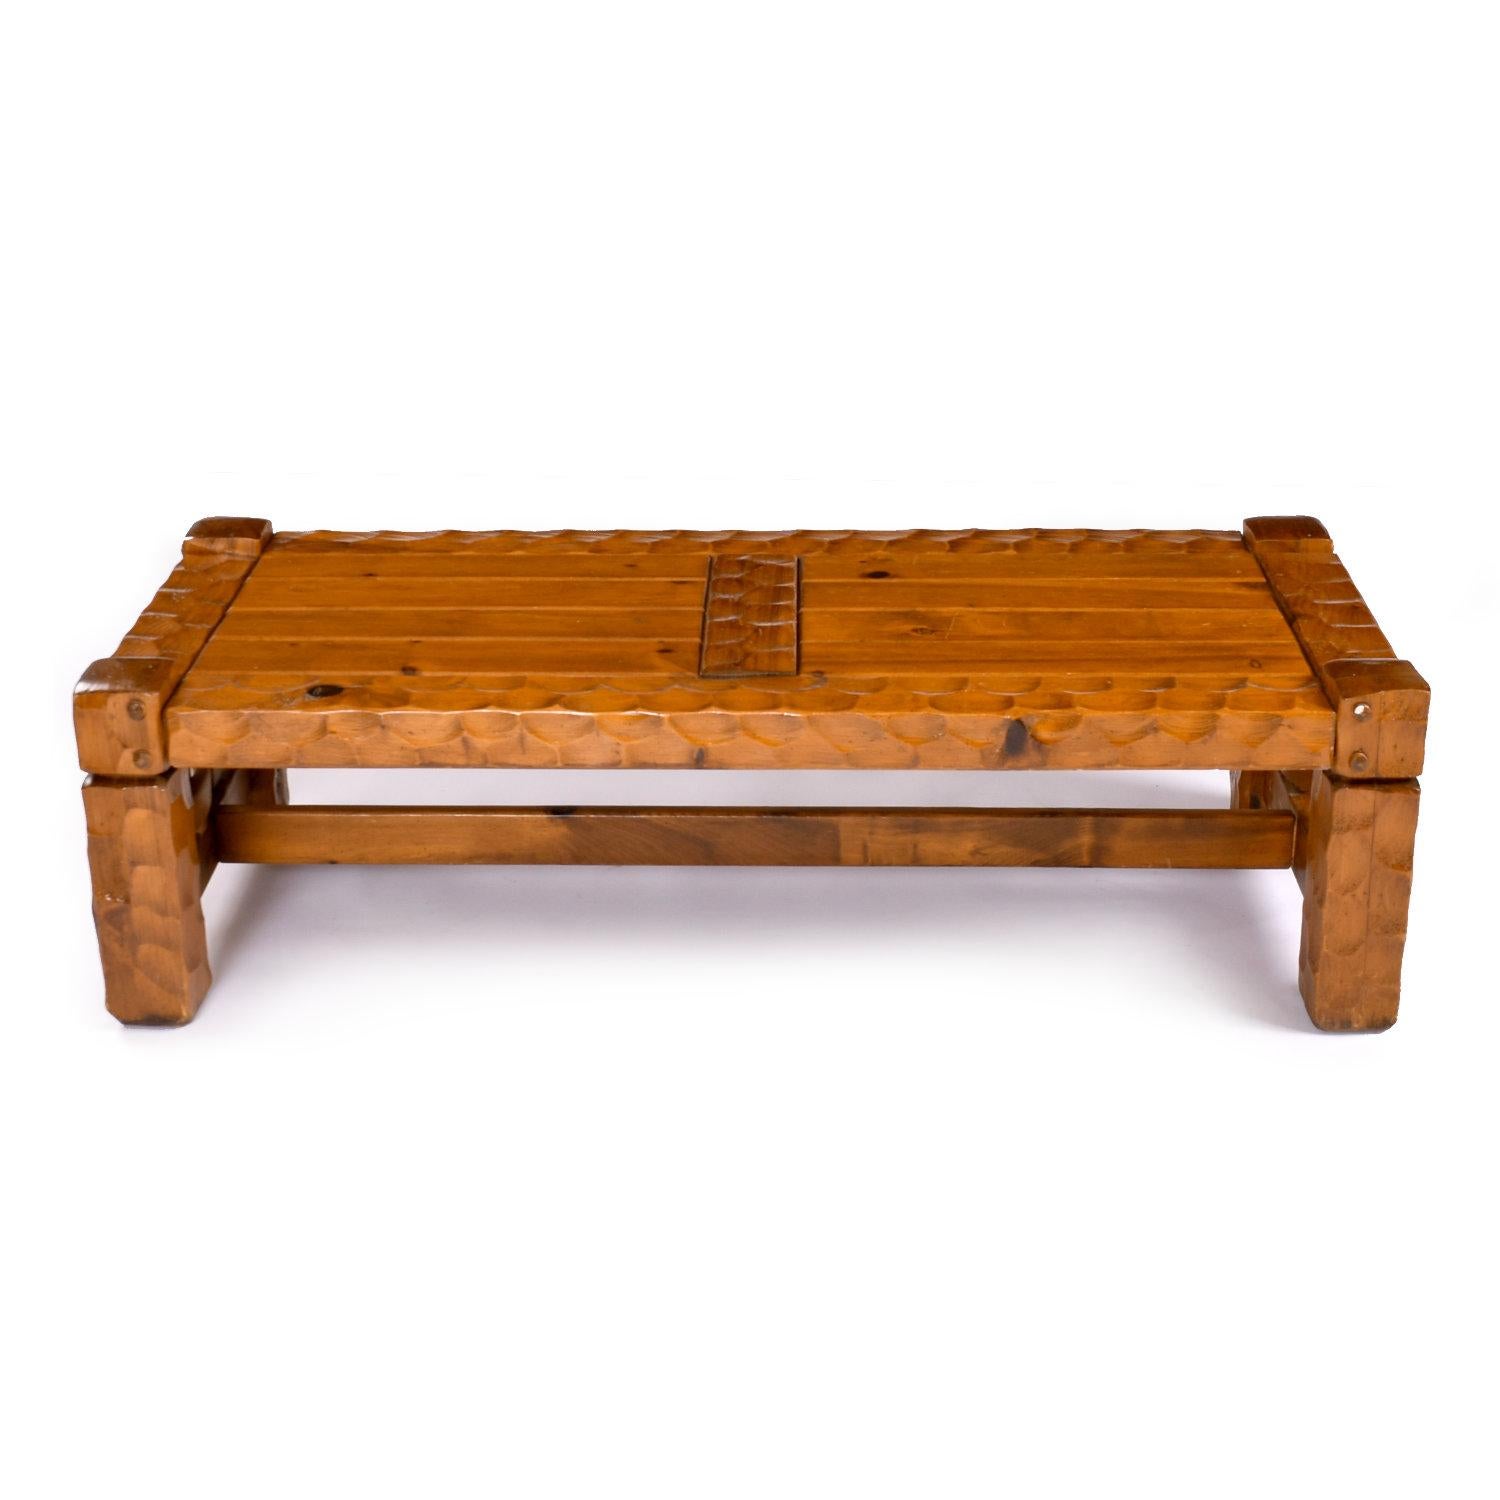 Set of of rustic knotty pine occasional tables by Null. This set includes the coffee table and side tables as pictured. You don’t need a ski lodge or Hemingway-esque cabin to integrate this into your decor. Made by Null Manufacturing of Maiden N.C.,